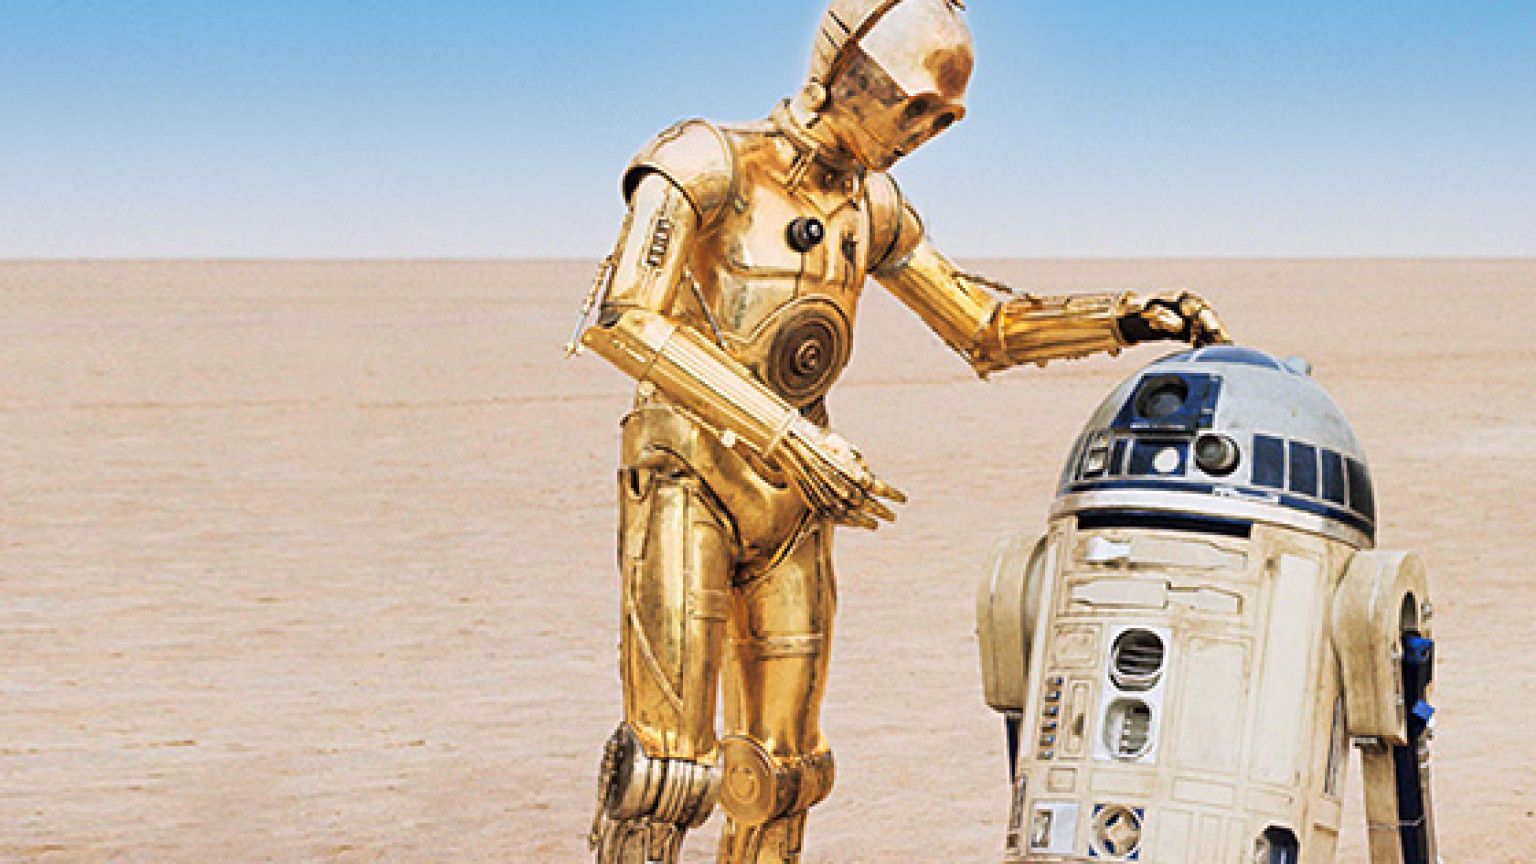 R2-D2 and C-3PO in Star Wars A New Hope